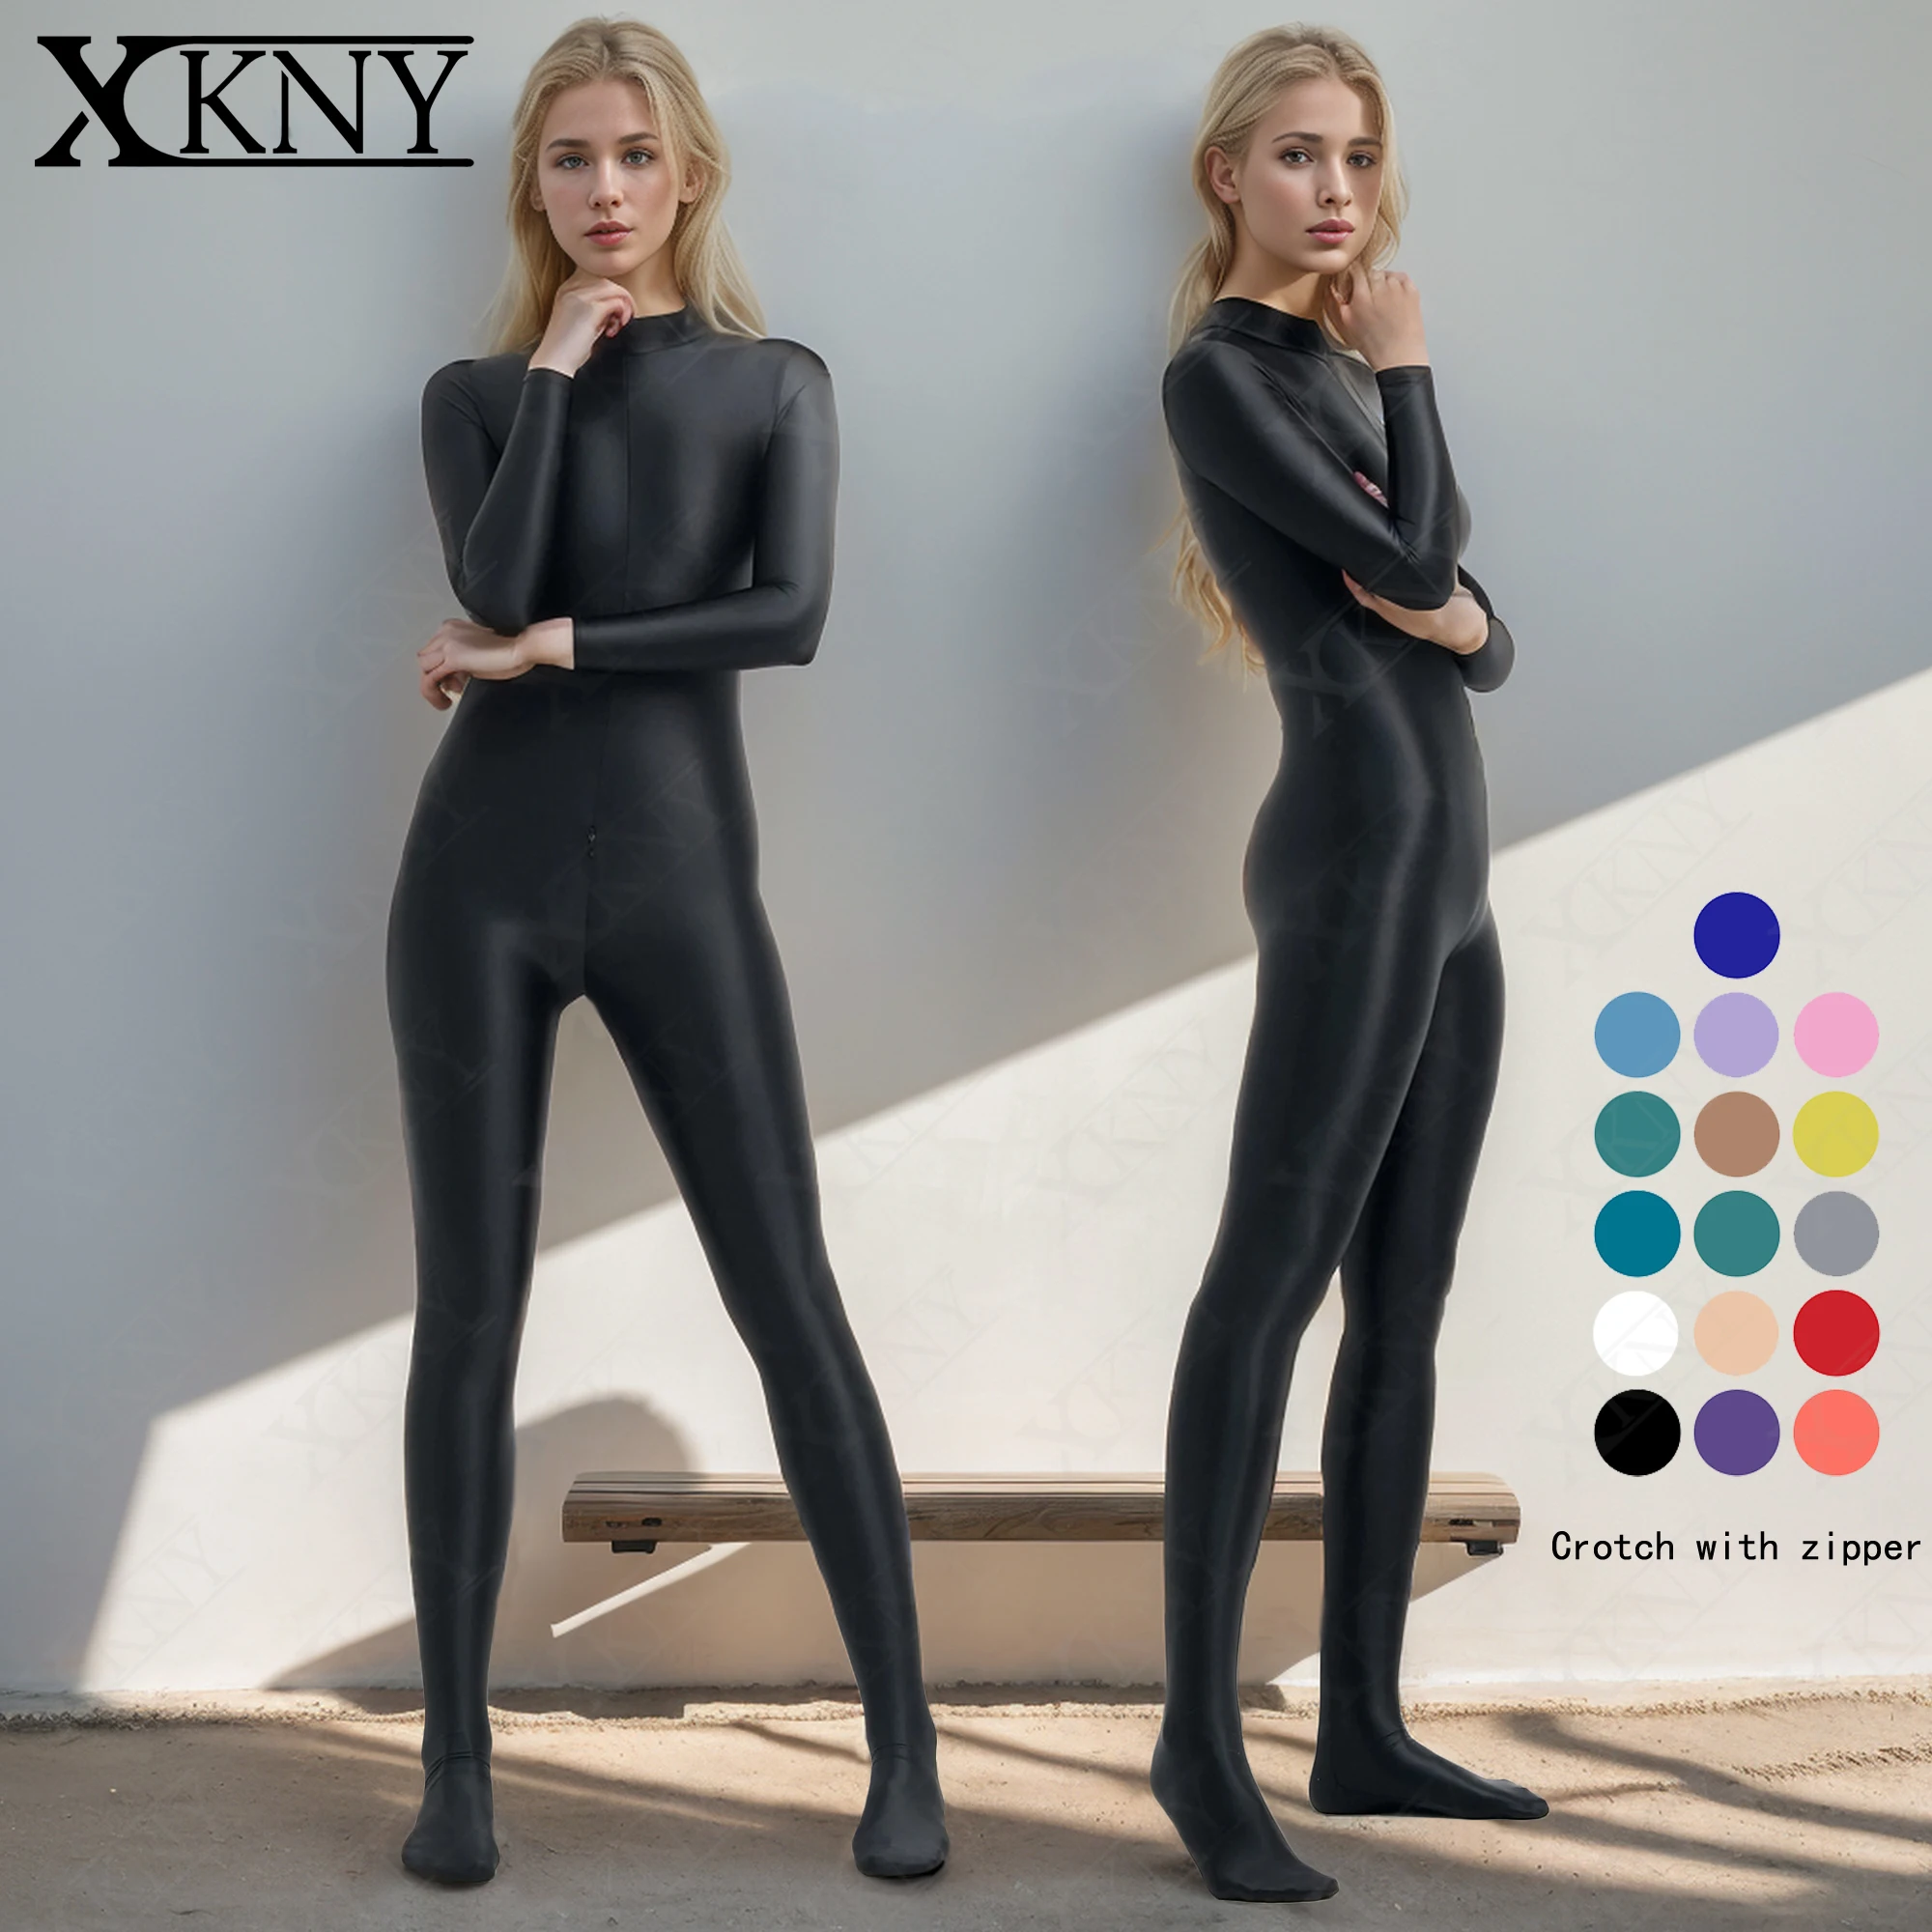 

XCKNY Women Shiny Bodysuit Tight-fitting Oil Smooth Long Zipper Overalls Yoga Zentai Suits Casual Sport Tights Catsuit Jumpsuits